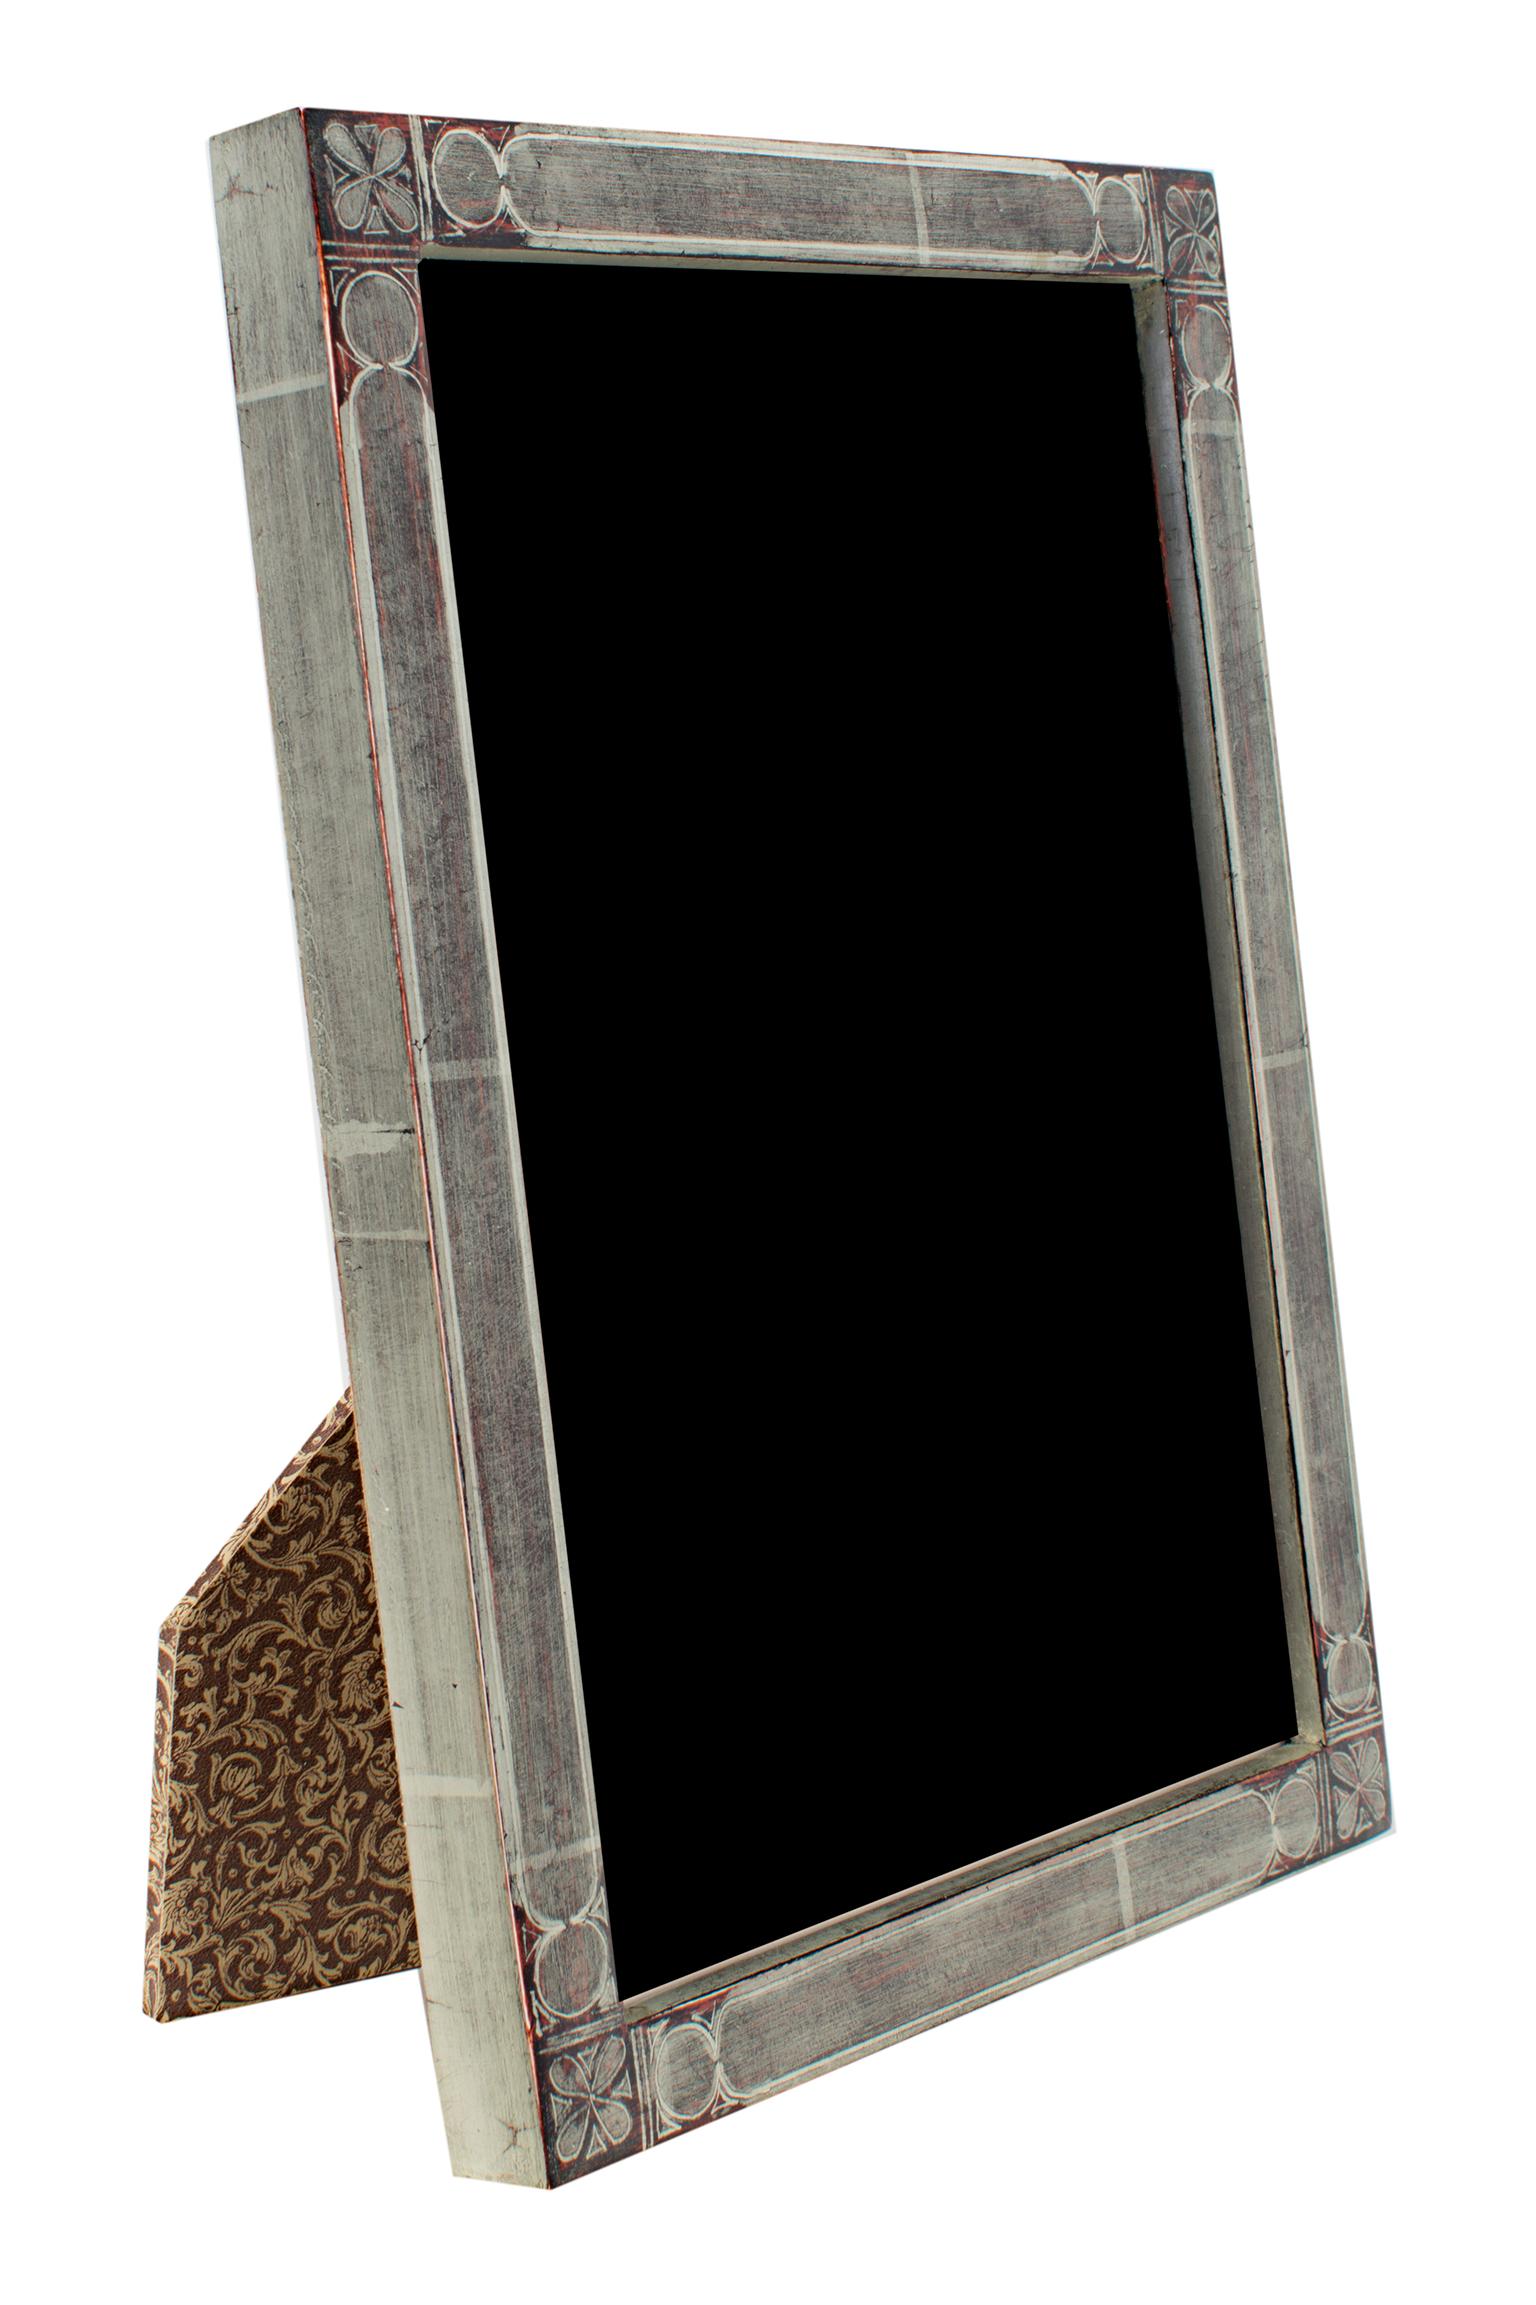 "Romanian Handmade Photo Frame, " 12K White Gold Leaf & Wood 5 x 7 Frame - Art by Unknown